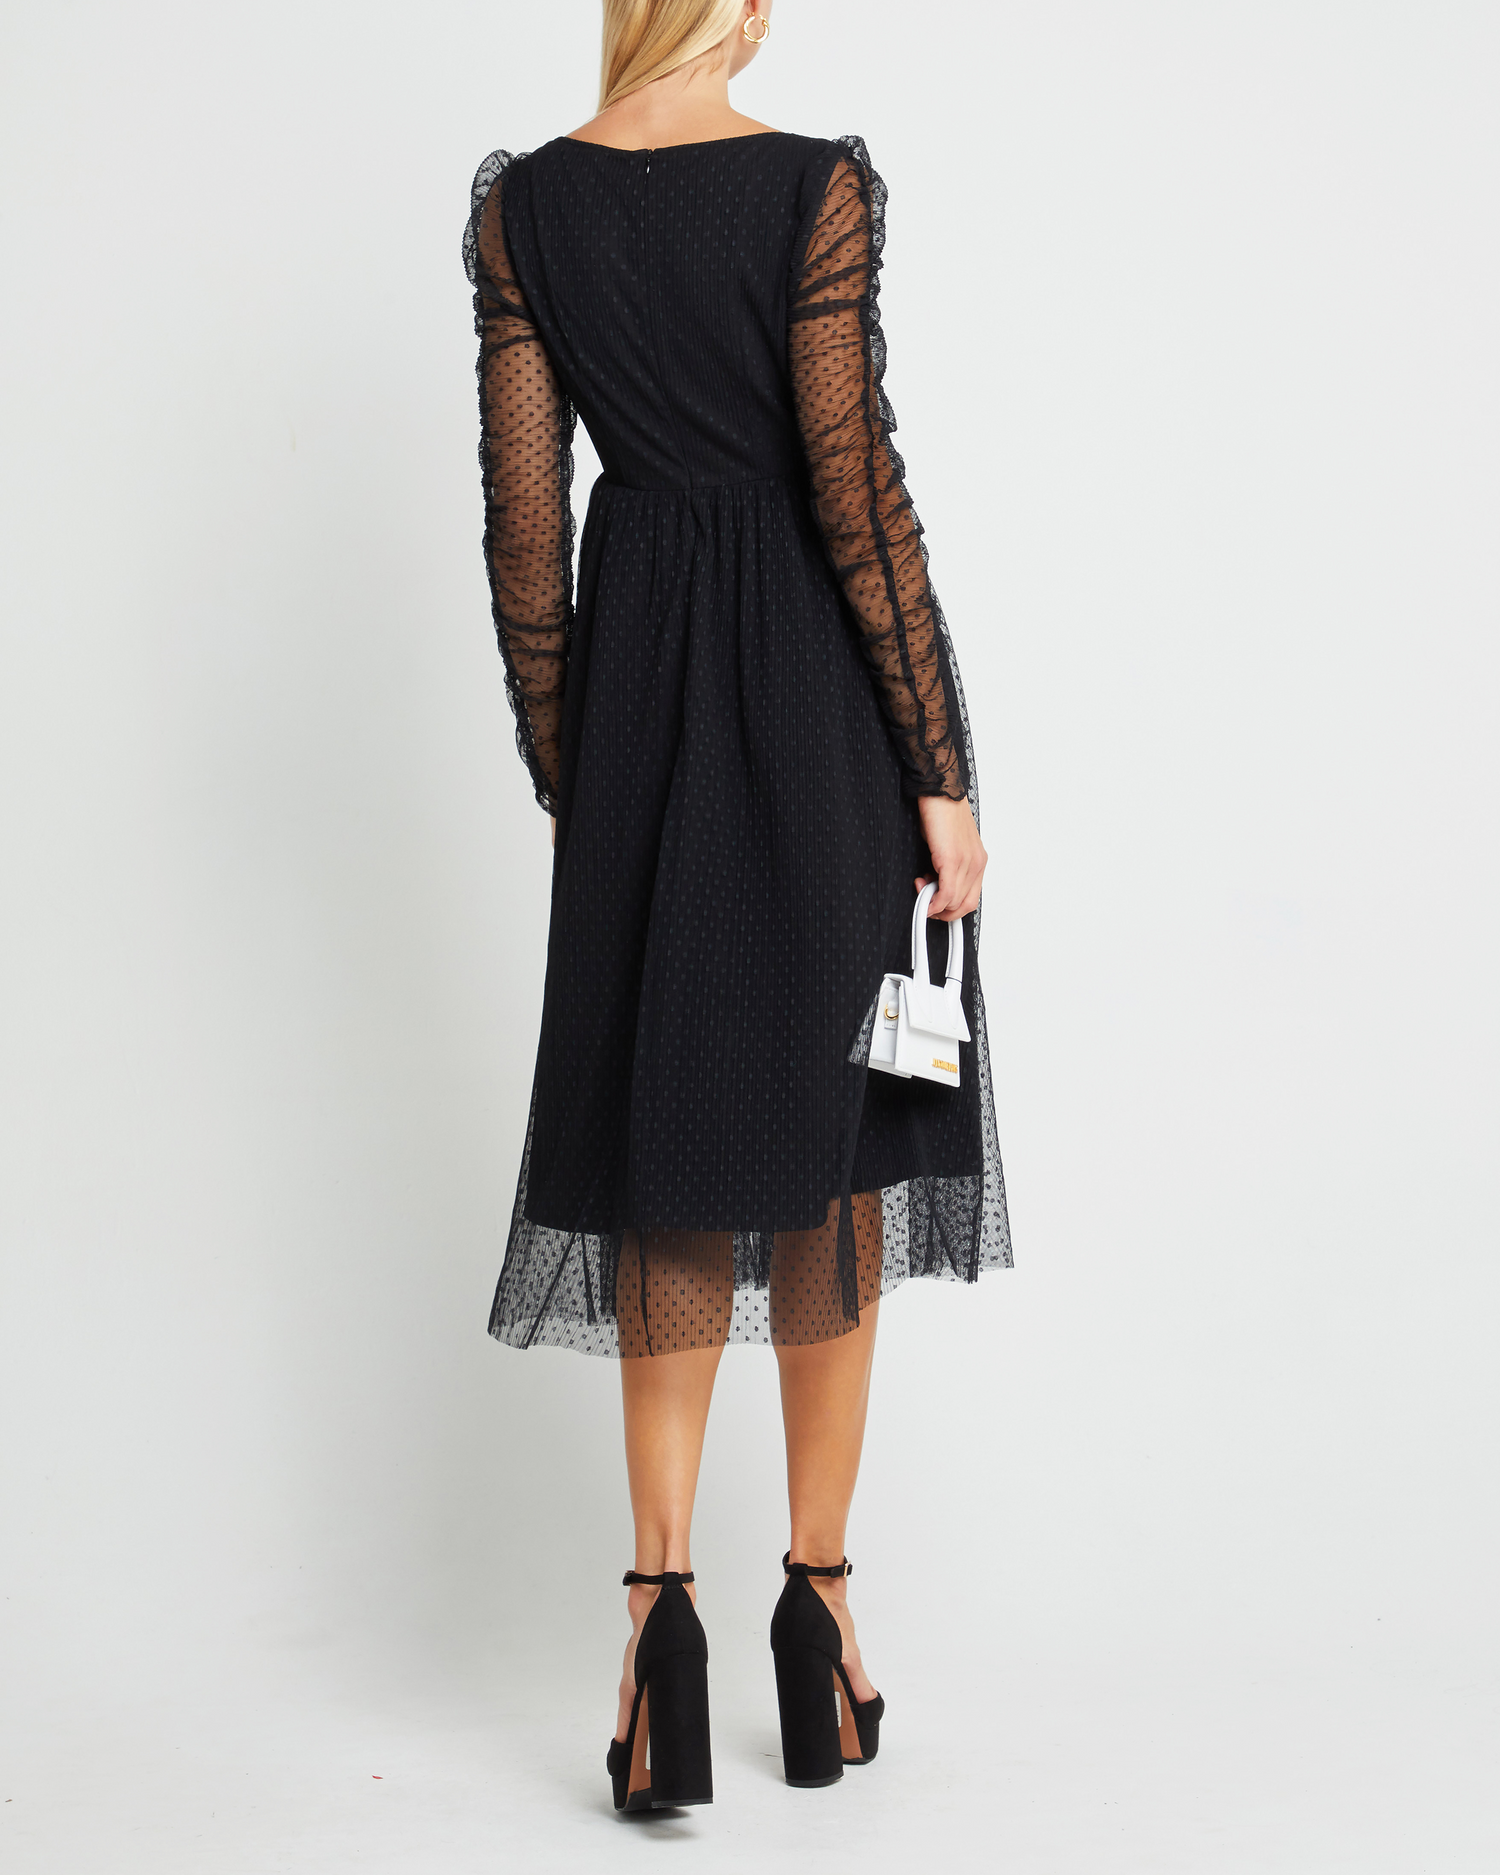 Second image of Daisy Dress, a black wedding guest dress with sheer long sleeves, v-neckline, ruched gathered bust detail, cinched waist, lining, dotted mesh fabric, and back zipper